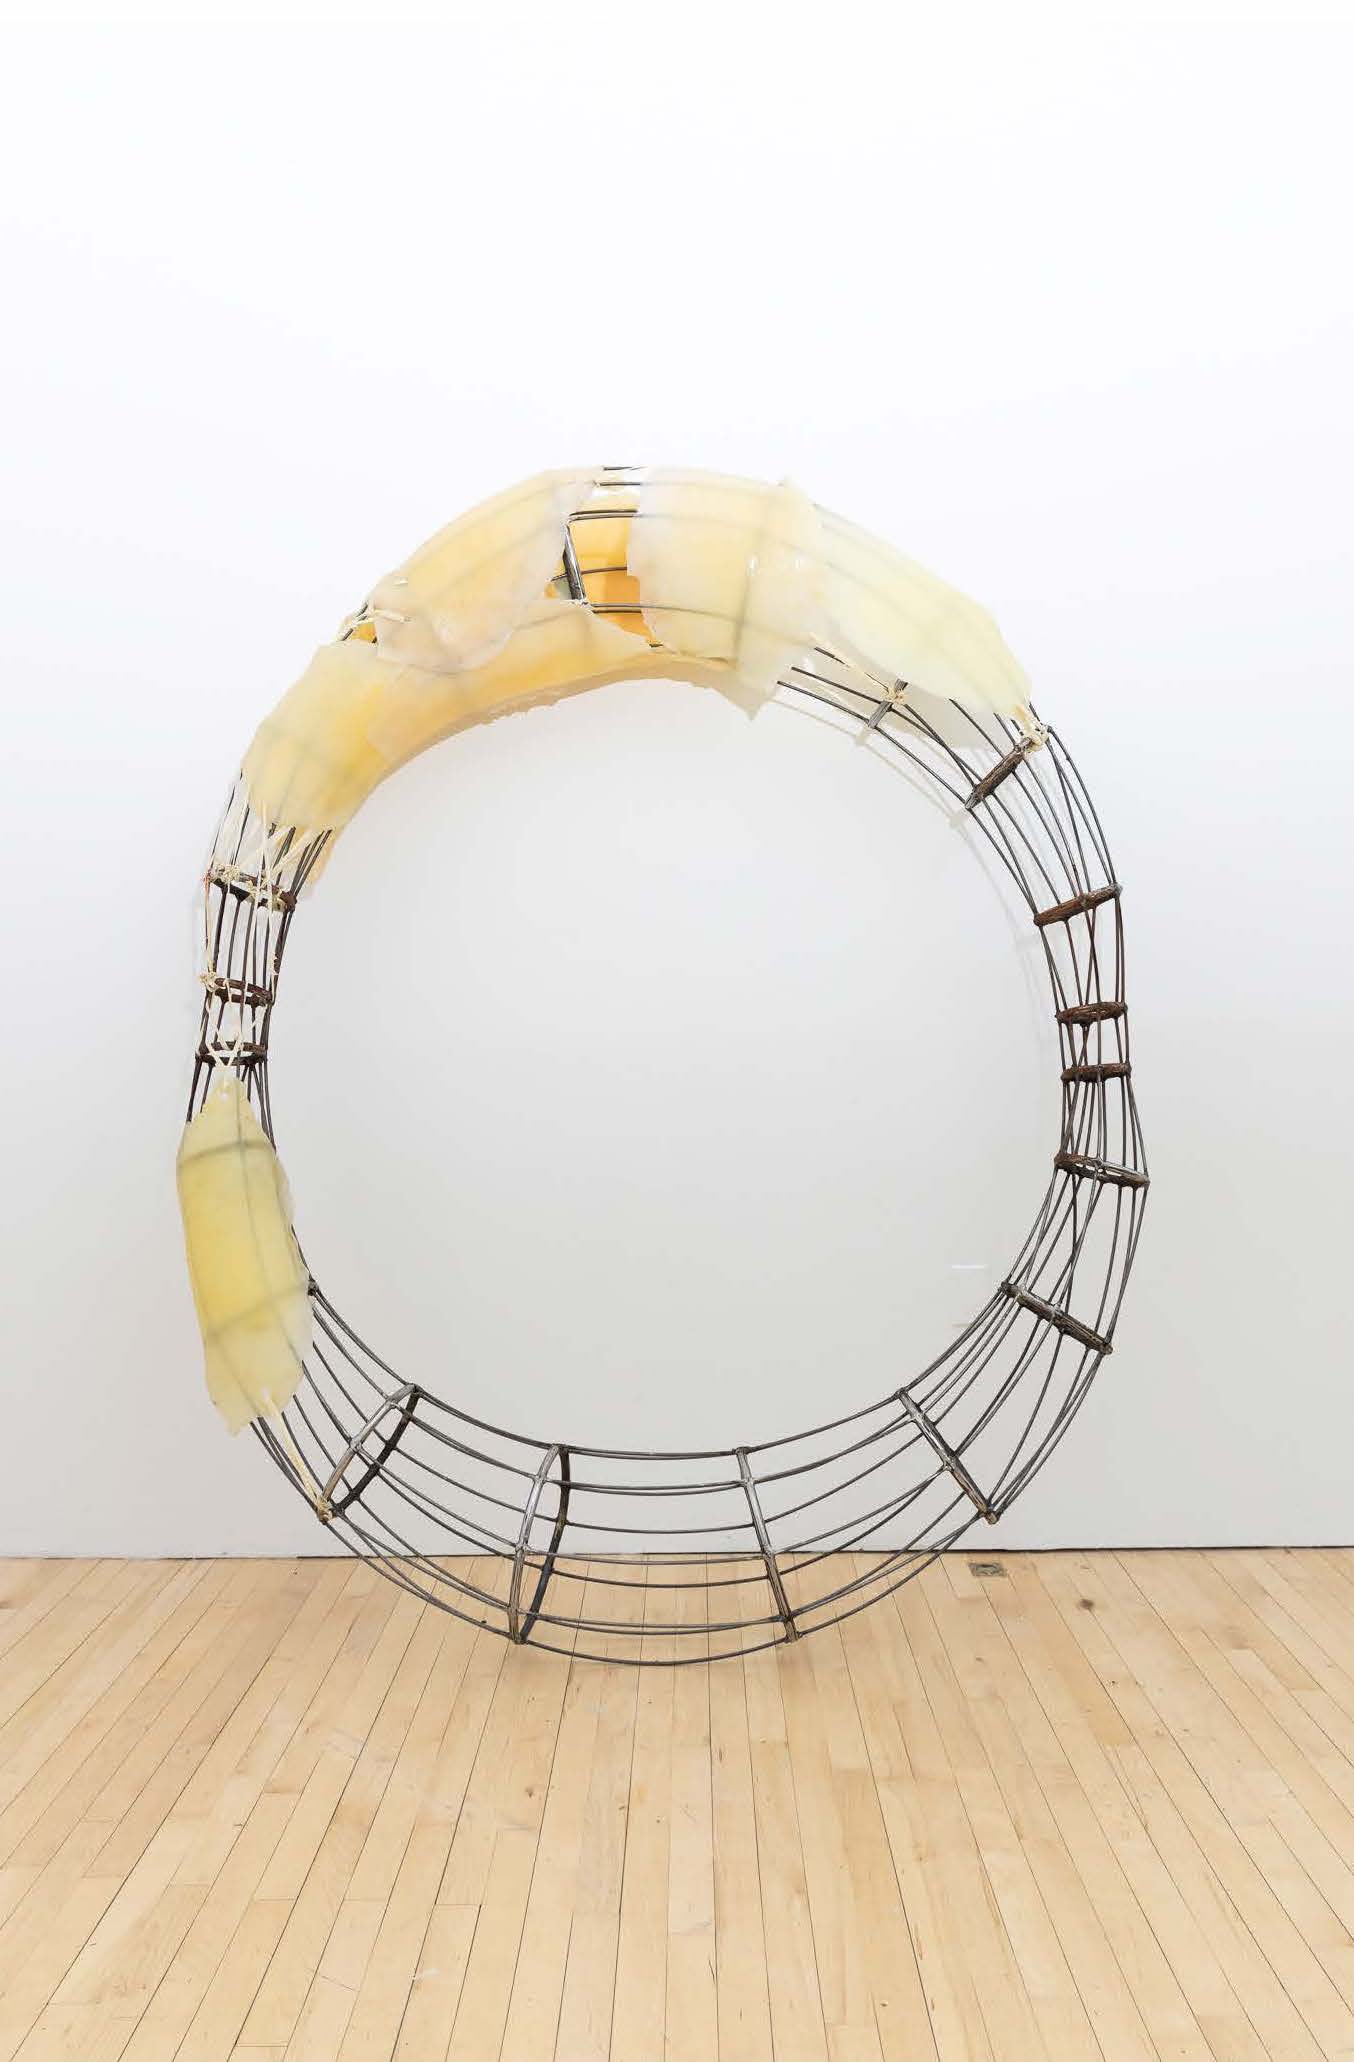 steel circle with latex pieces